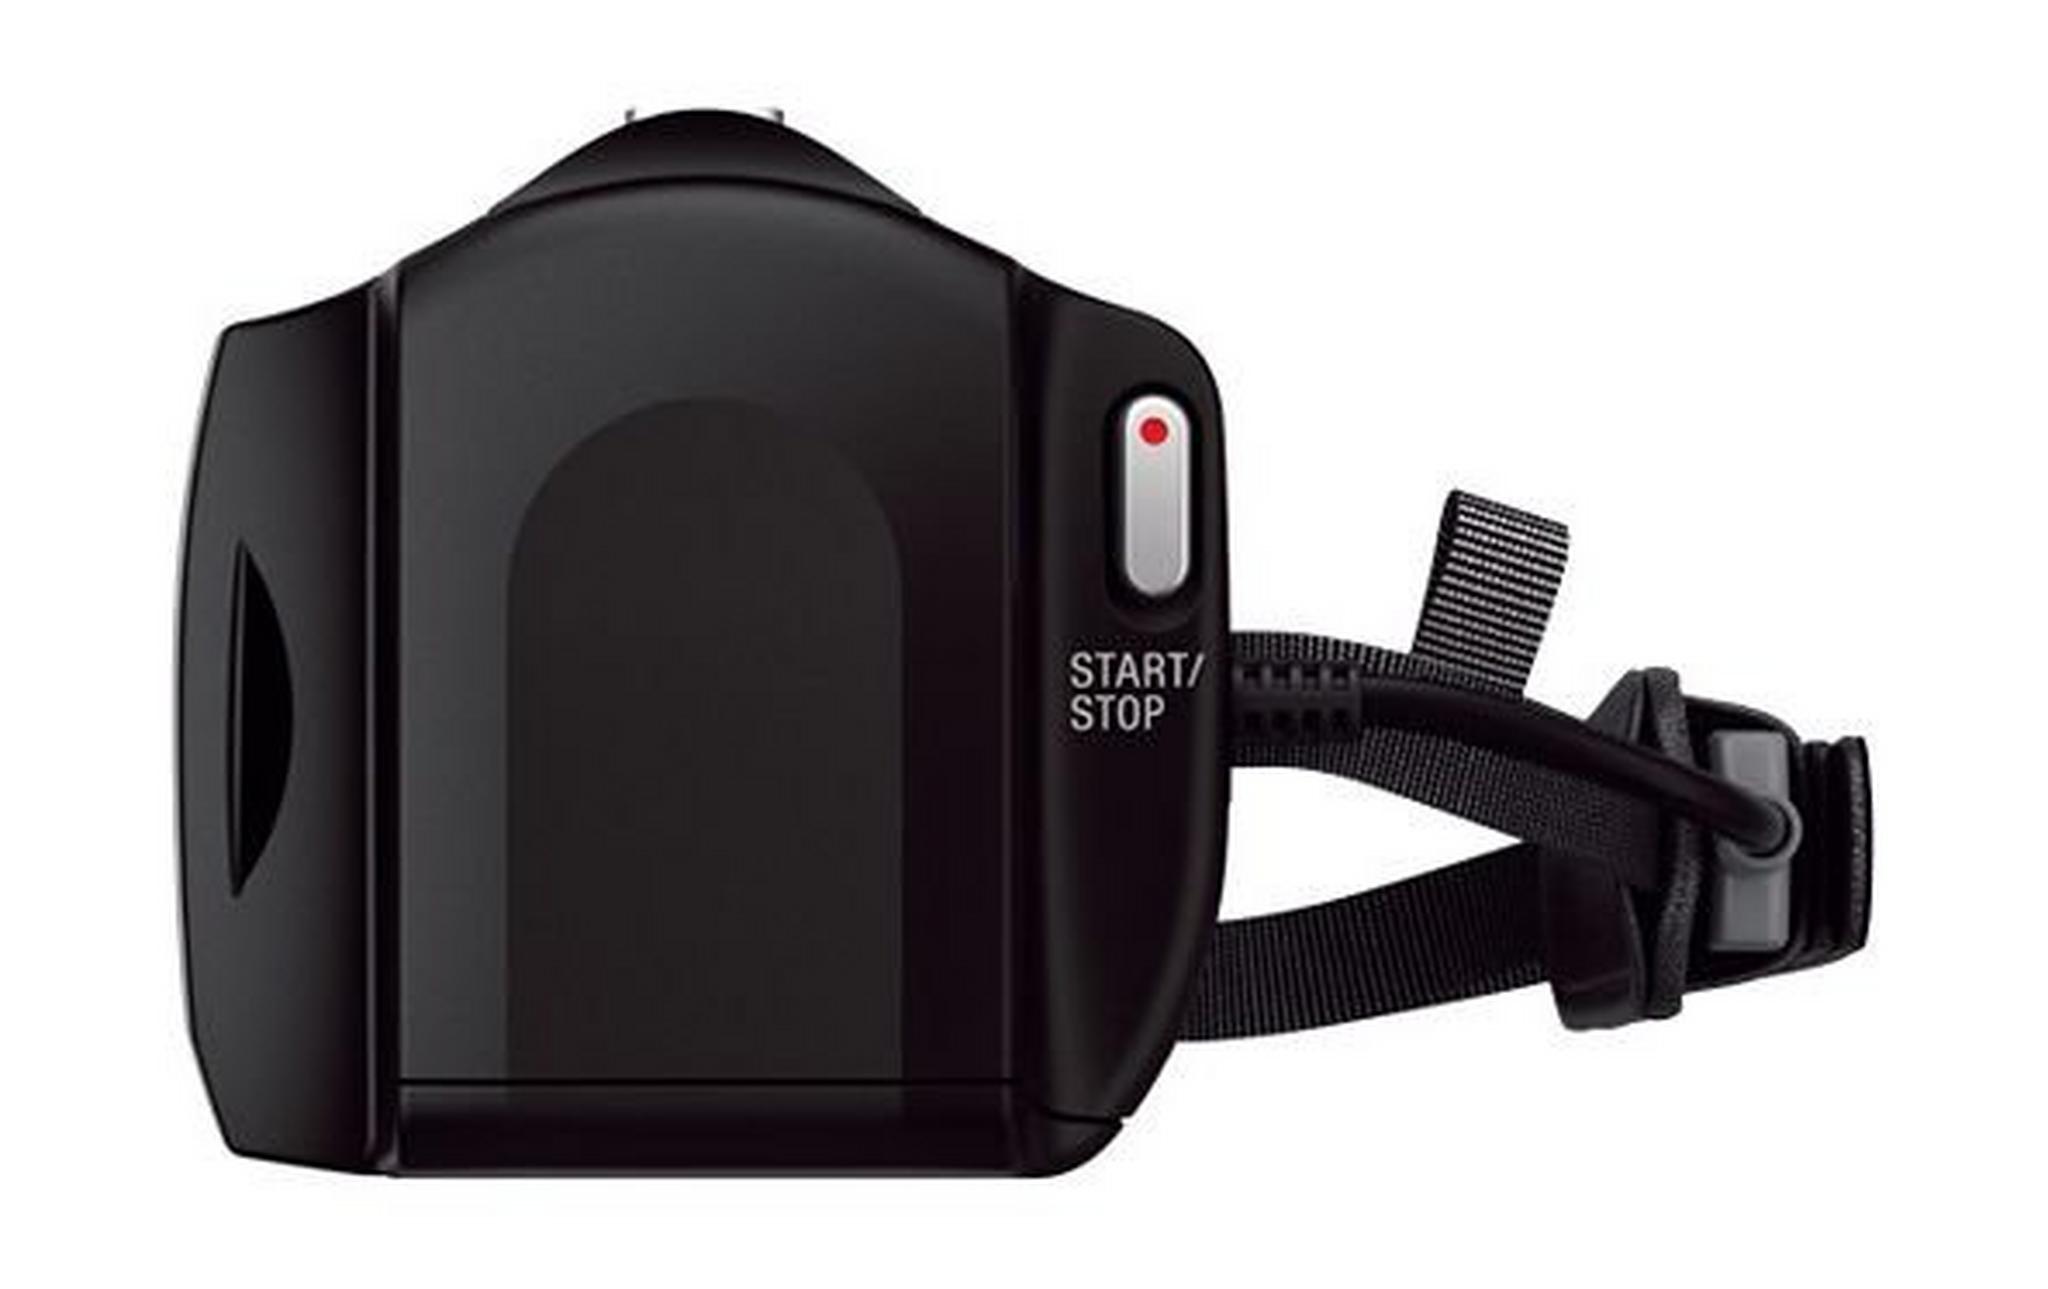 Sony HDR-PJ410 Handycam with Built-In Projector